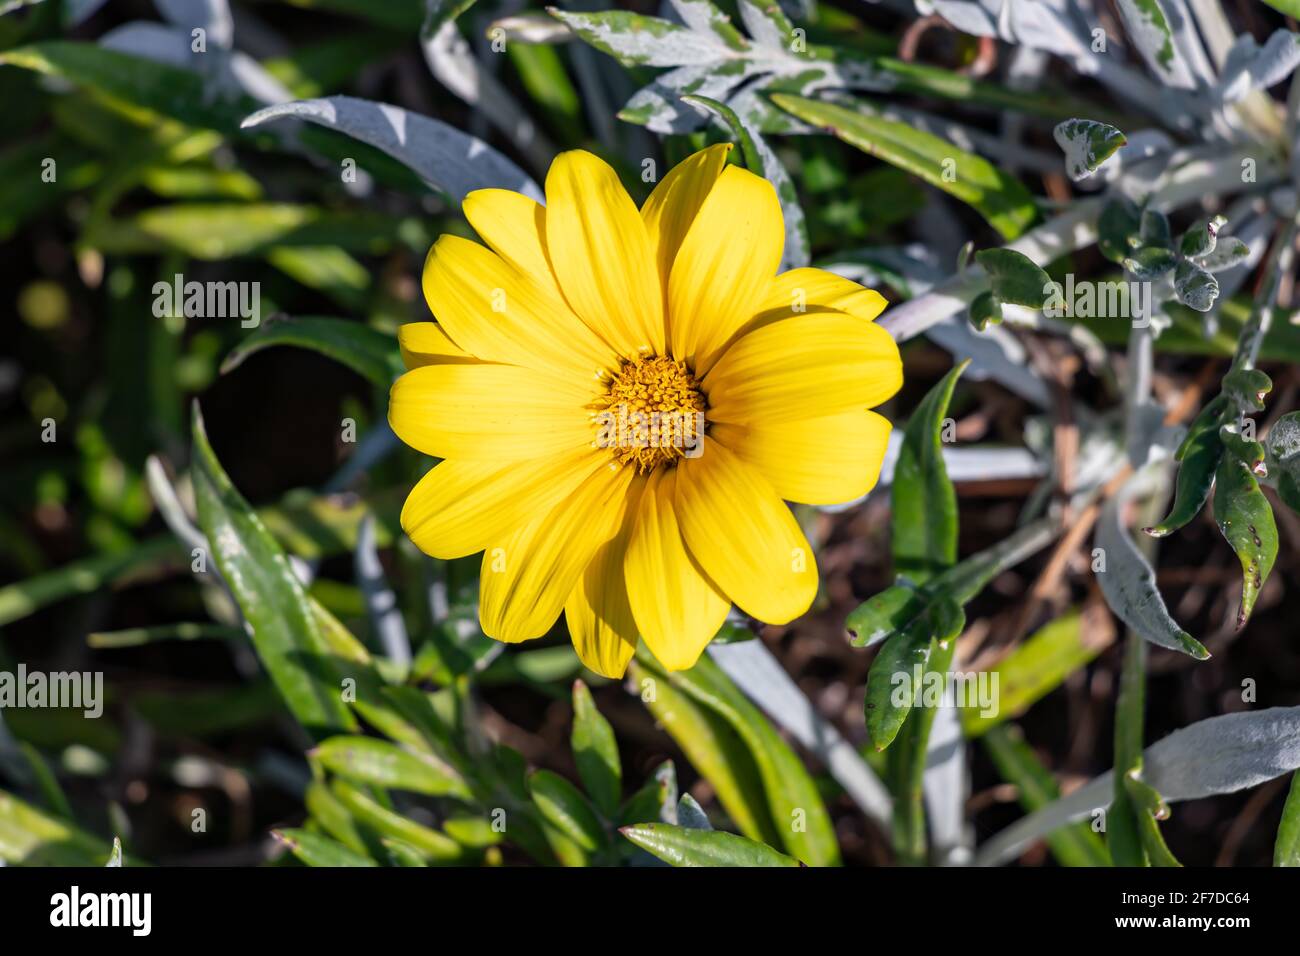 Yellow daisy, or Euryops pectinatus flowers, Also known as Gray-leaf or  Silver Star flowers. It is a species of shrub belonging to the Asteraceae fam Stock Photo